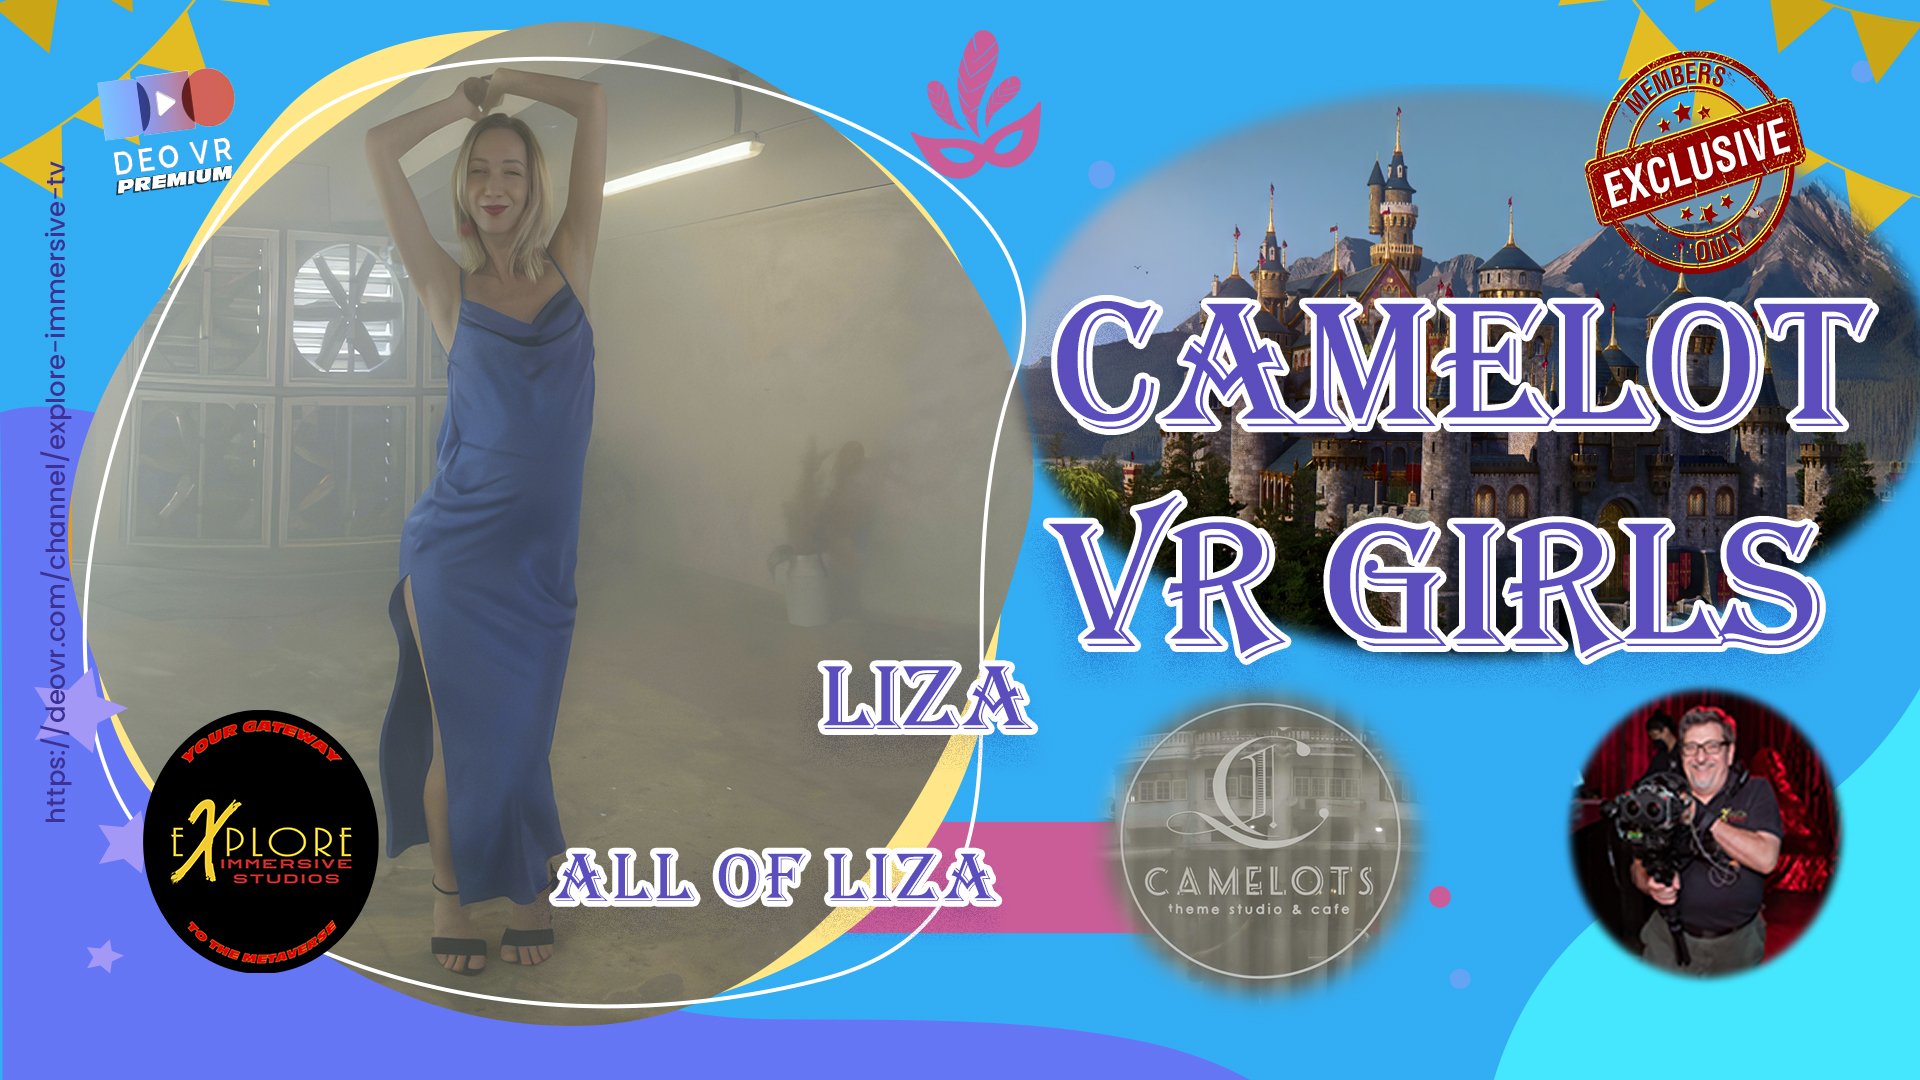 All of Camelot VR Girl Liza - All of Camelot VR Girl Liza in one combined video. #VR #Sexy #Dance #Music #Girls